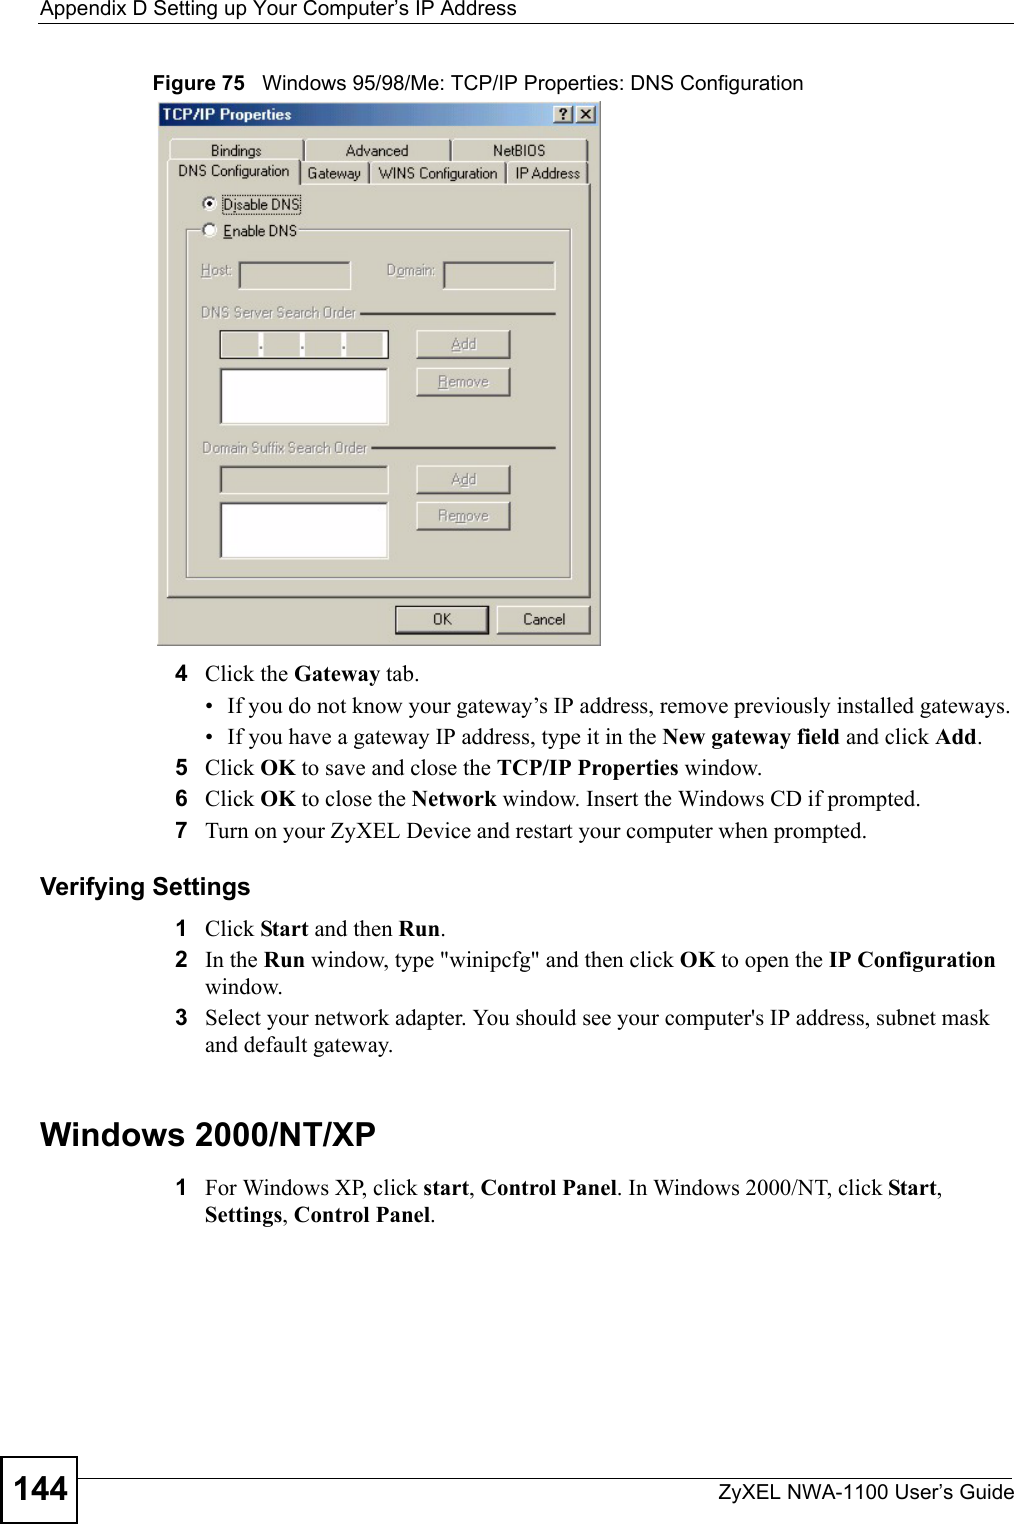 Appendix D Setting up Your Computer’s IP AddressZyXEL NWA-1100 User’s Guide144Figure 75   Windows 95/98/Me: TCP/IP Properties: DNS Configuration4Click the Gateway tab.• If you do not know your gateway’s IP address, remove previously installed gateways.• If you have a gateway IP address, type it in the New gateway field and click Add.5Click OK to save and close the TCP/IP Properties window.6Click OK to close the Network window. Insert the Windows CD if prompted.7Turn on your ZyXEL Device and restart your computer when prompted.Verifying Settings1Click Start and then Run.2In the Run window, type &quot;winipcfg&quot; and then click OK to open the IP Configuration window.3Select your network adapter. You should see your computer&apos;s IP address, subnet mask and default gateway.Windows 2000/NT/XP1For Windows XP, click start, Control Panel. In Windows 2000/NT, click Start, Settings, Control Panel.